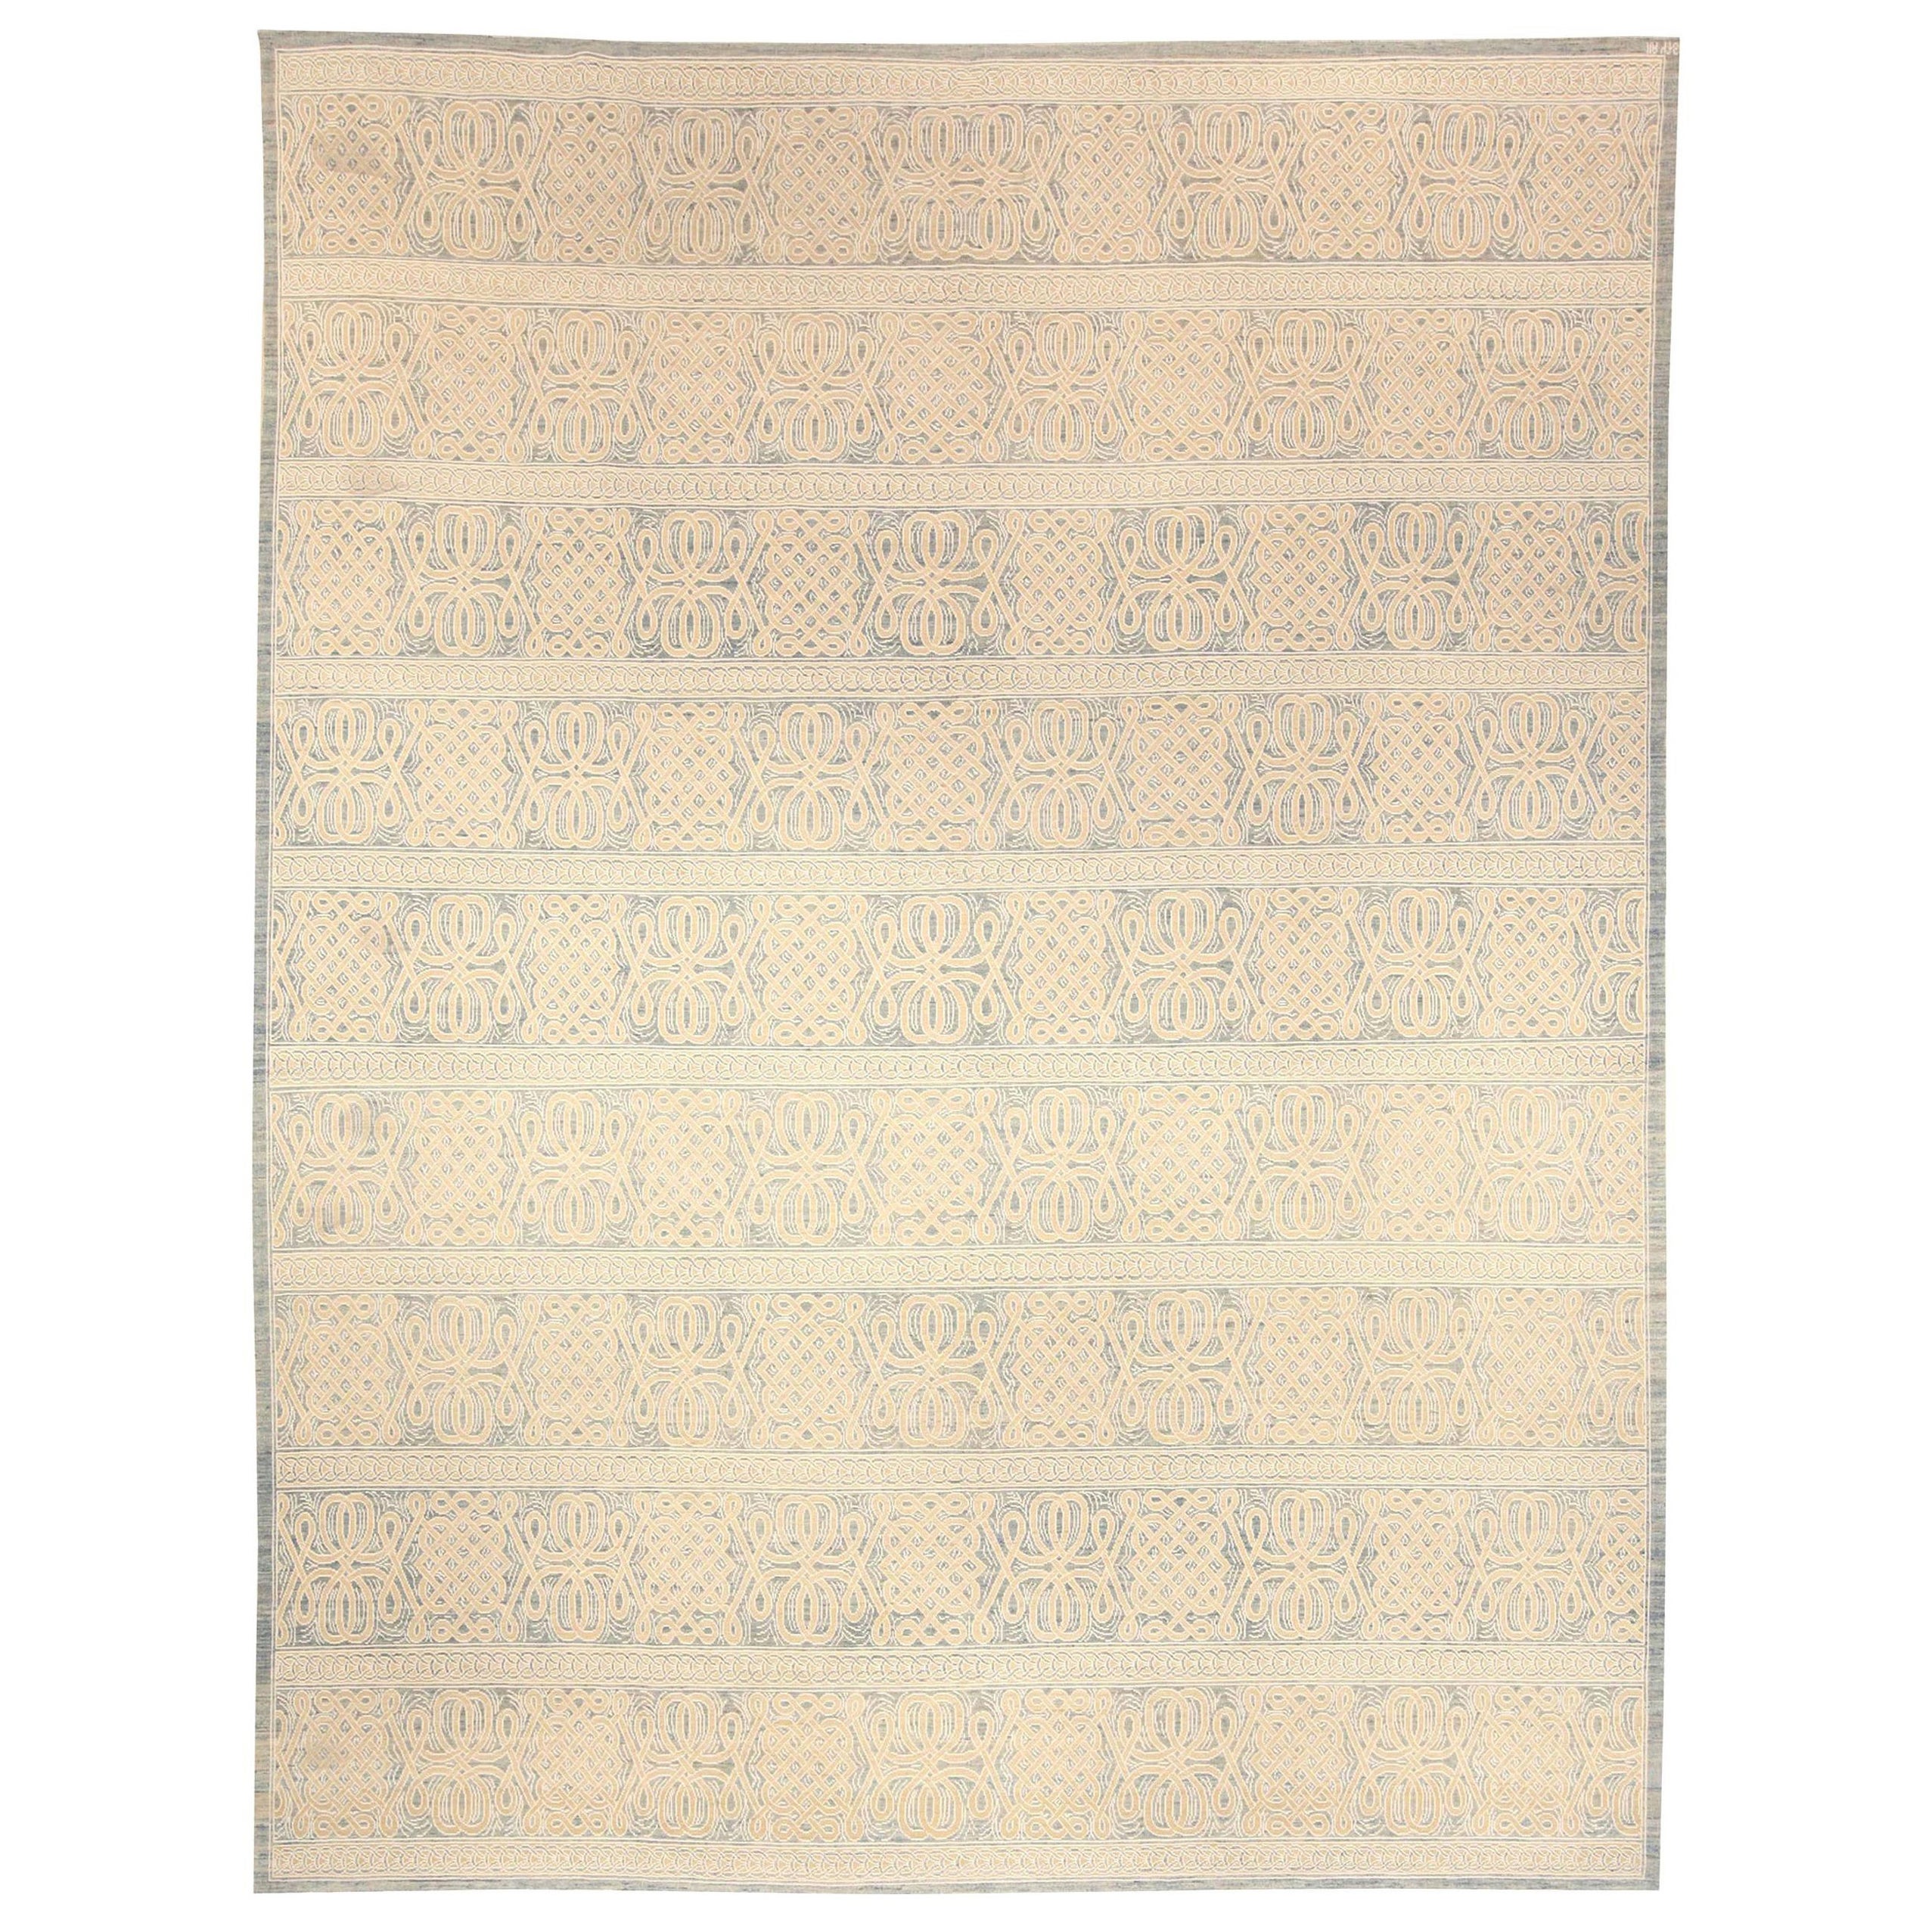 Modern Vespero Beige, Blue and White Hand Knotted Wool Rug by Doris Leslie Blau For Sale